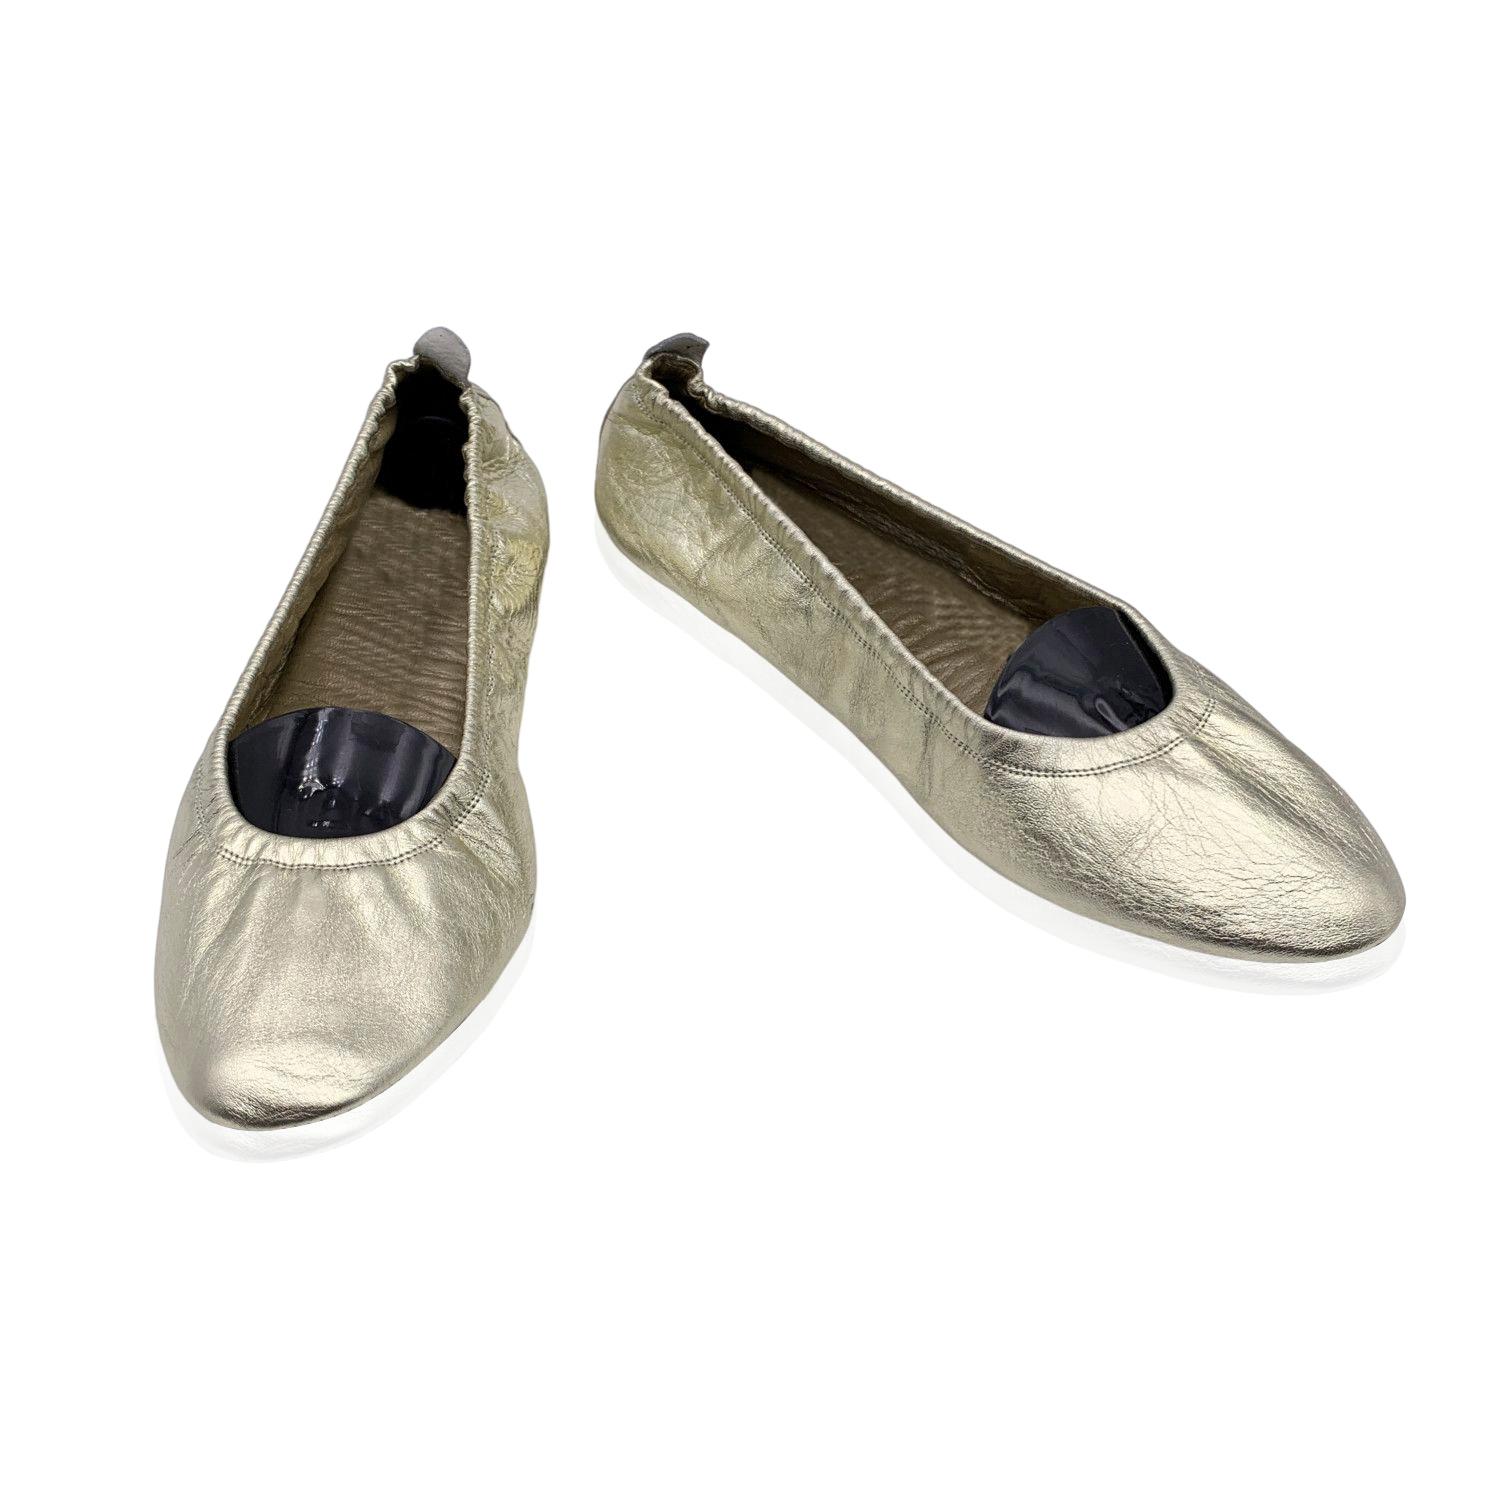 Beautiful rare vintage Gucci foldable portable travel ballet flat roll up slipper shoes ballet flats. Gold metallic leather. Suede outsoles. For internal use. Elastic collar. They will come with their black velvet pouch with gold metal embroidered